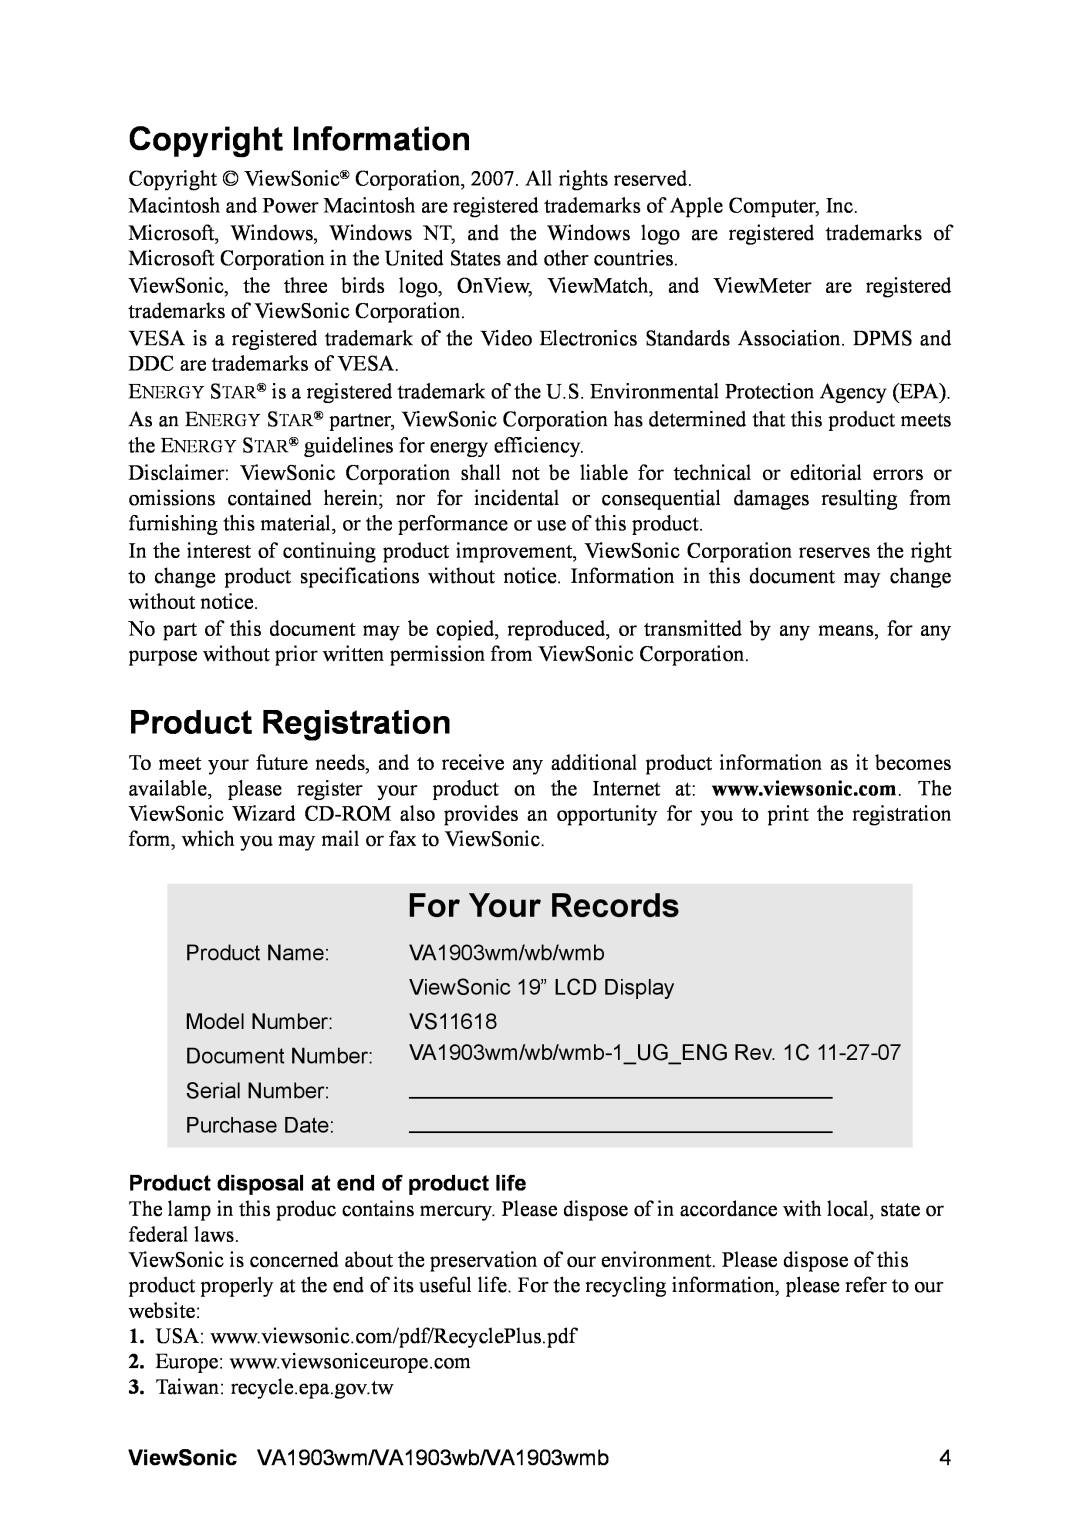 ViewSonic VA1903wm Copyright Information, Product Registration, For Your Records, Product disposal at end of product life 